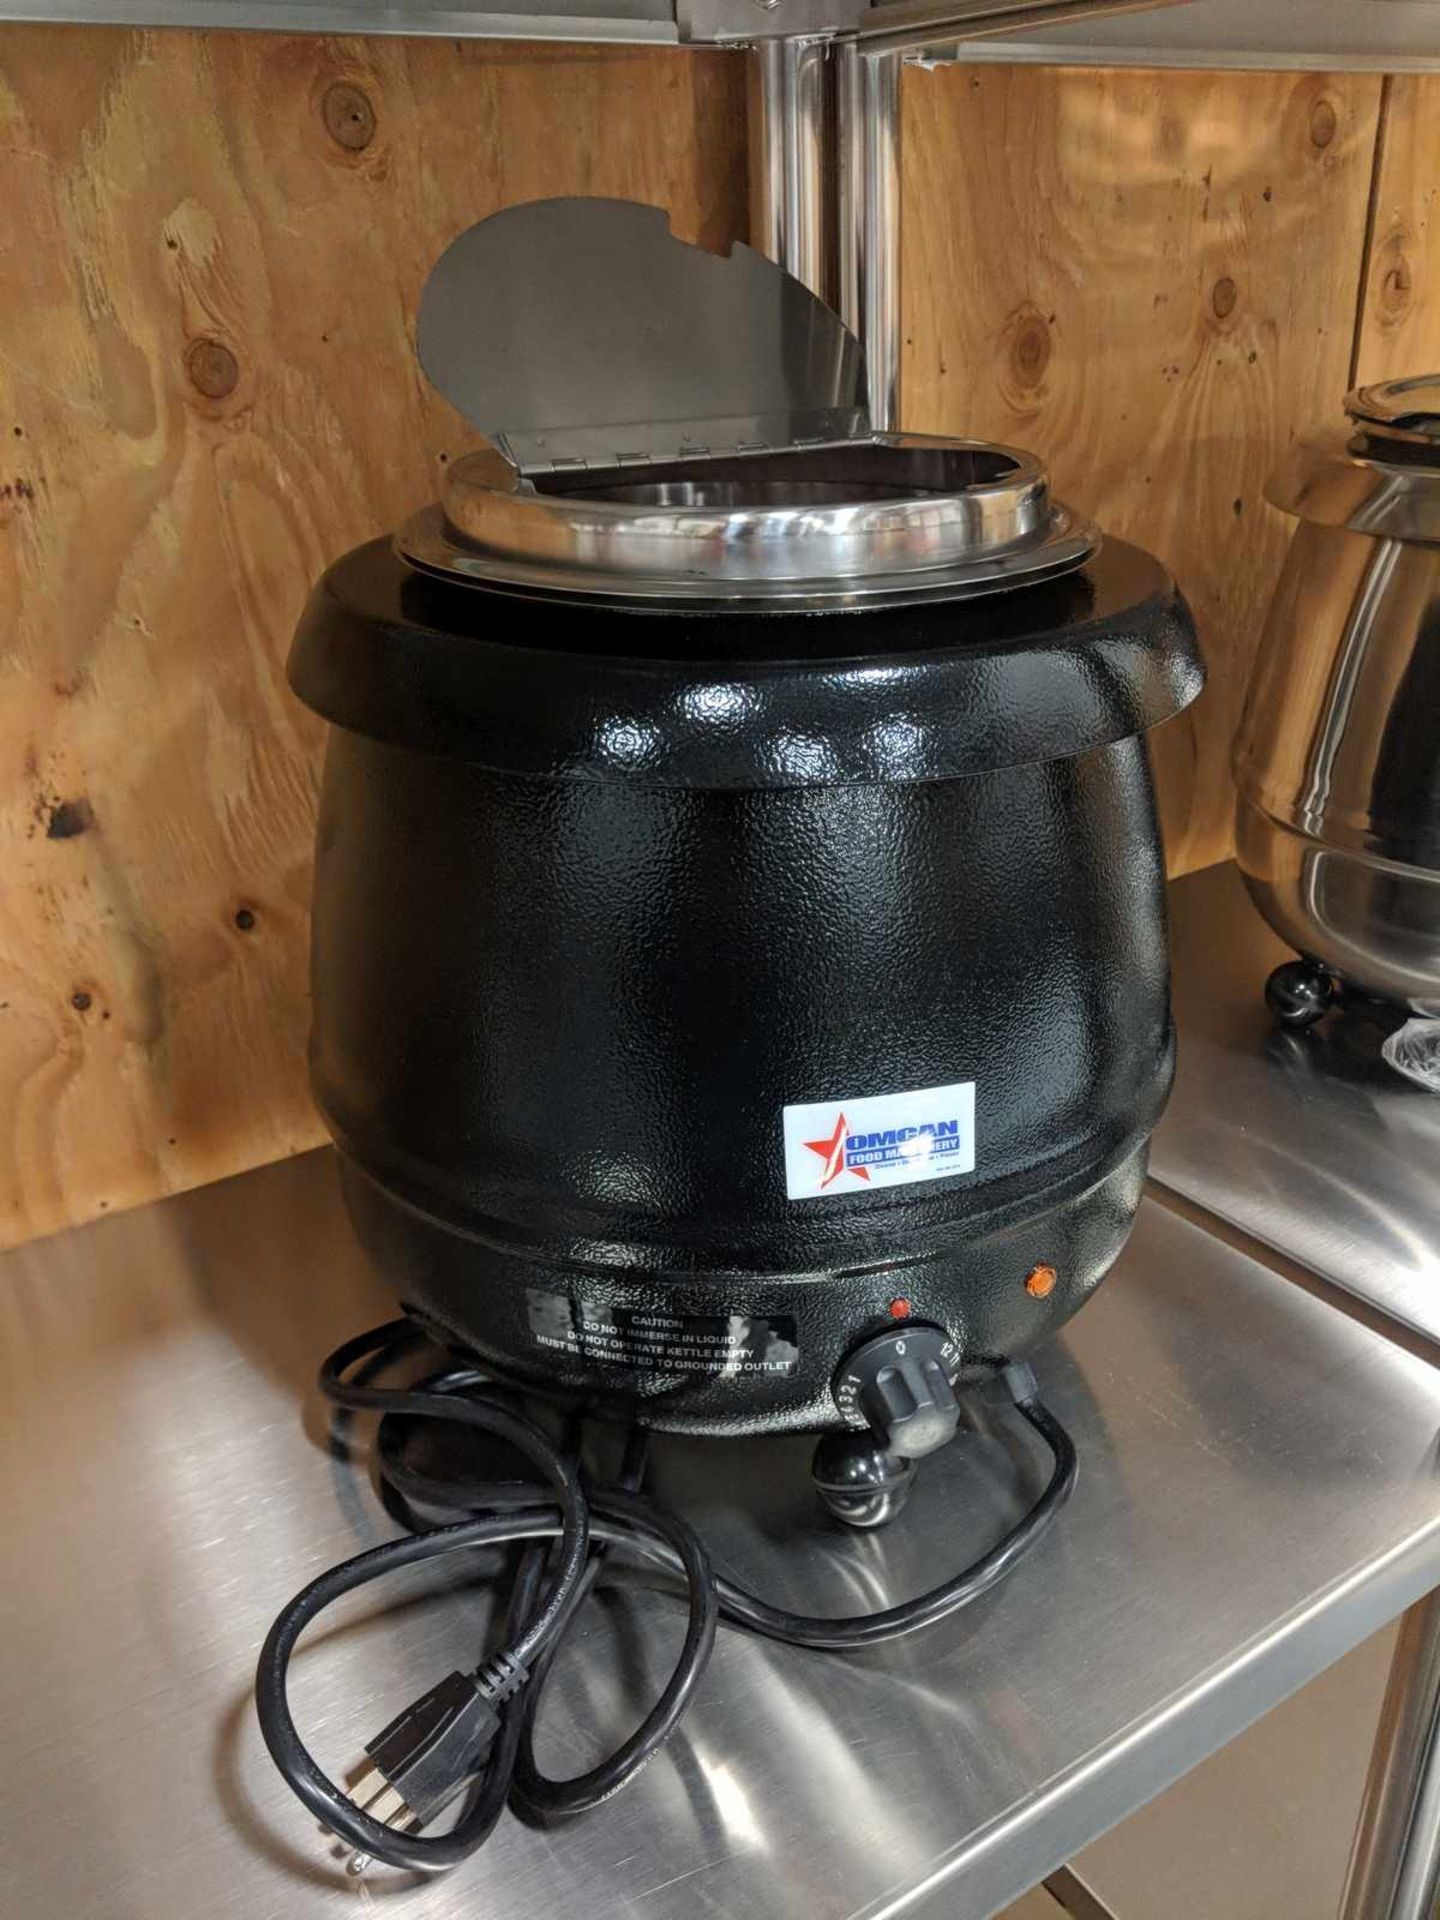 10L Black Soup Kettle with Stainless Lid - Image 2 of 7